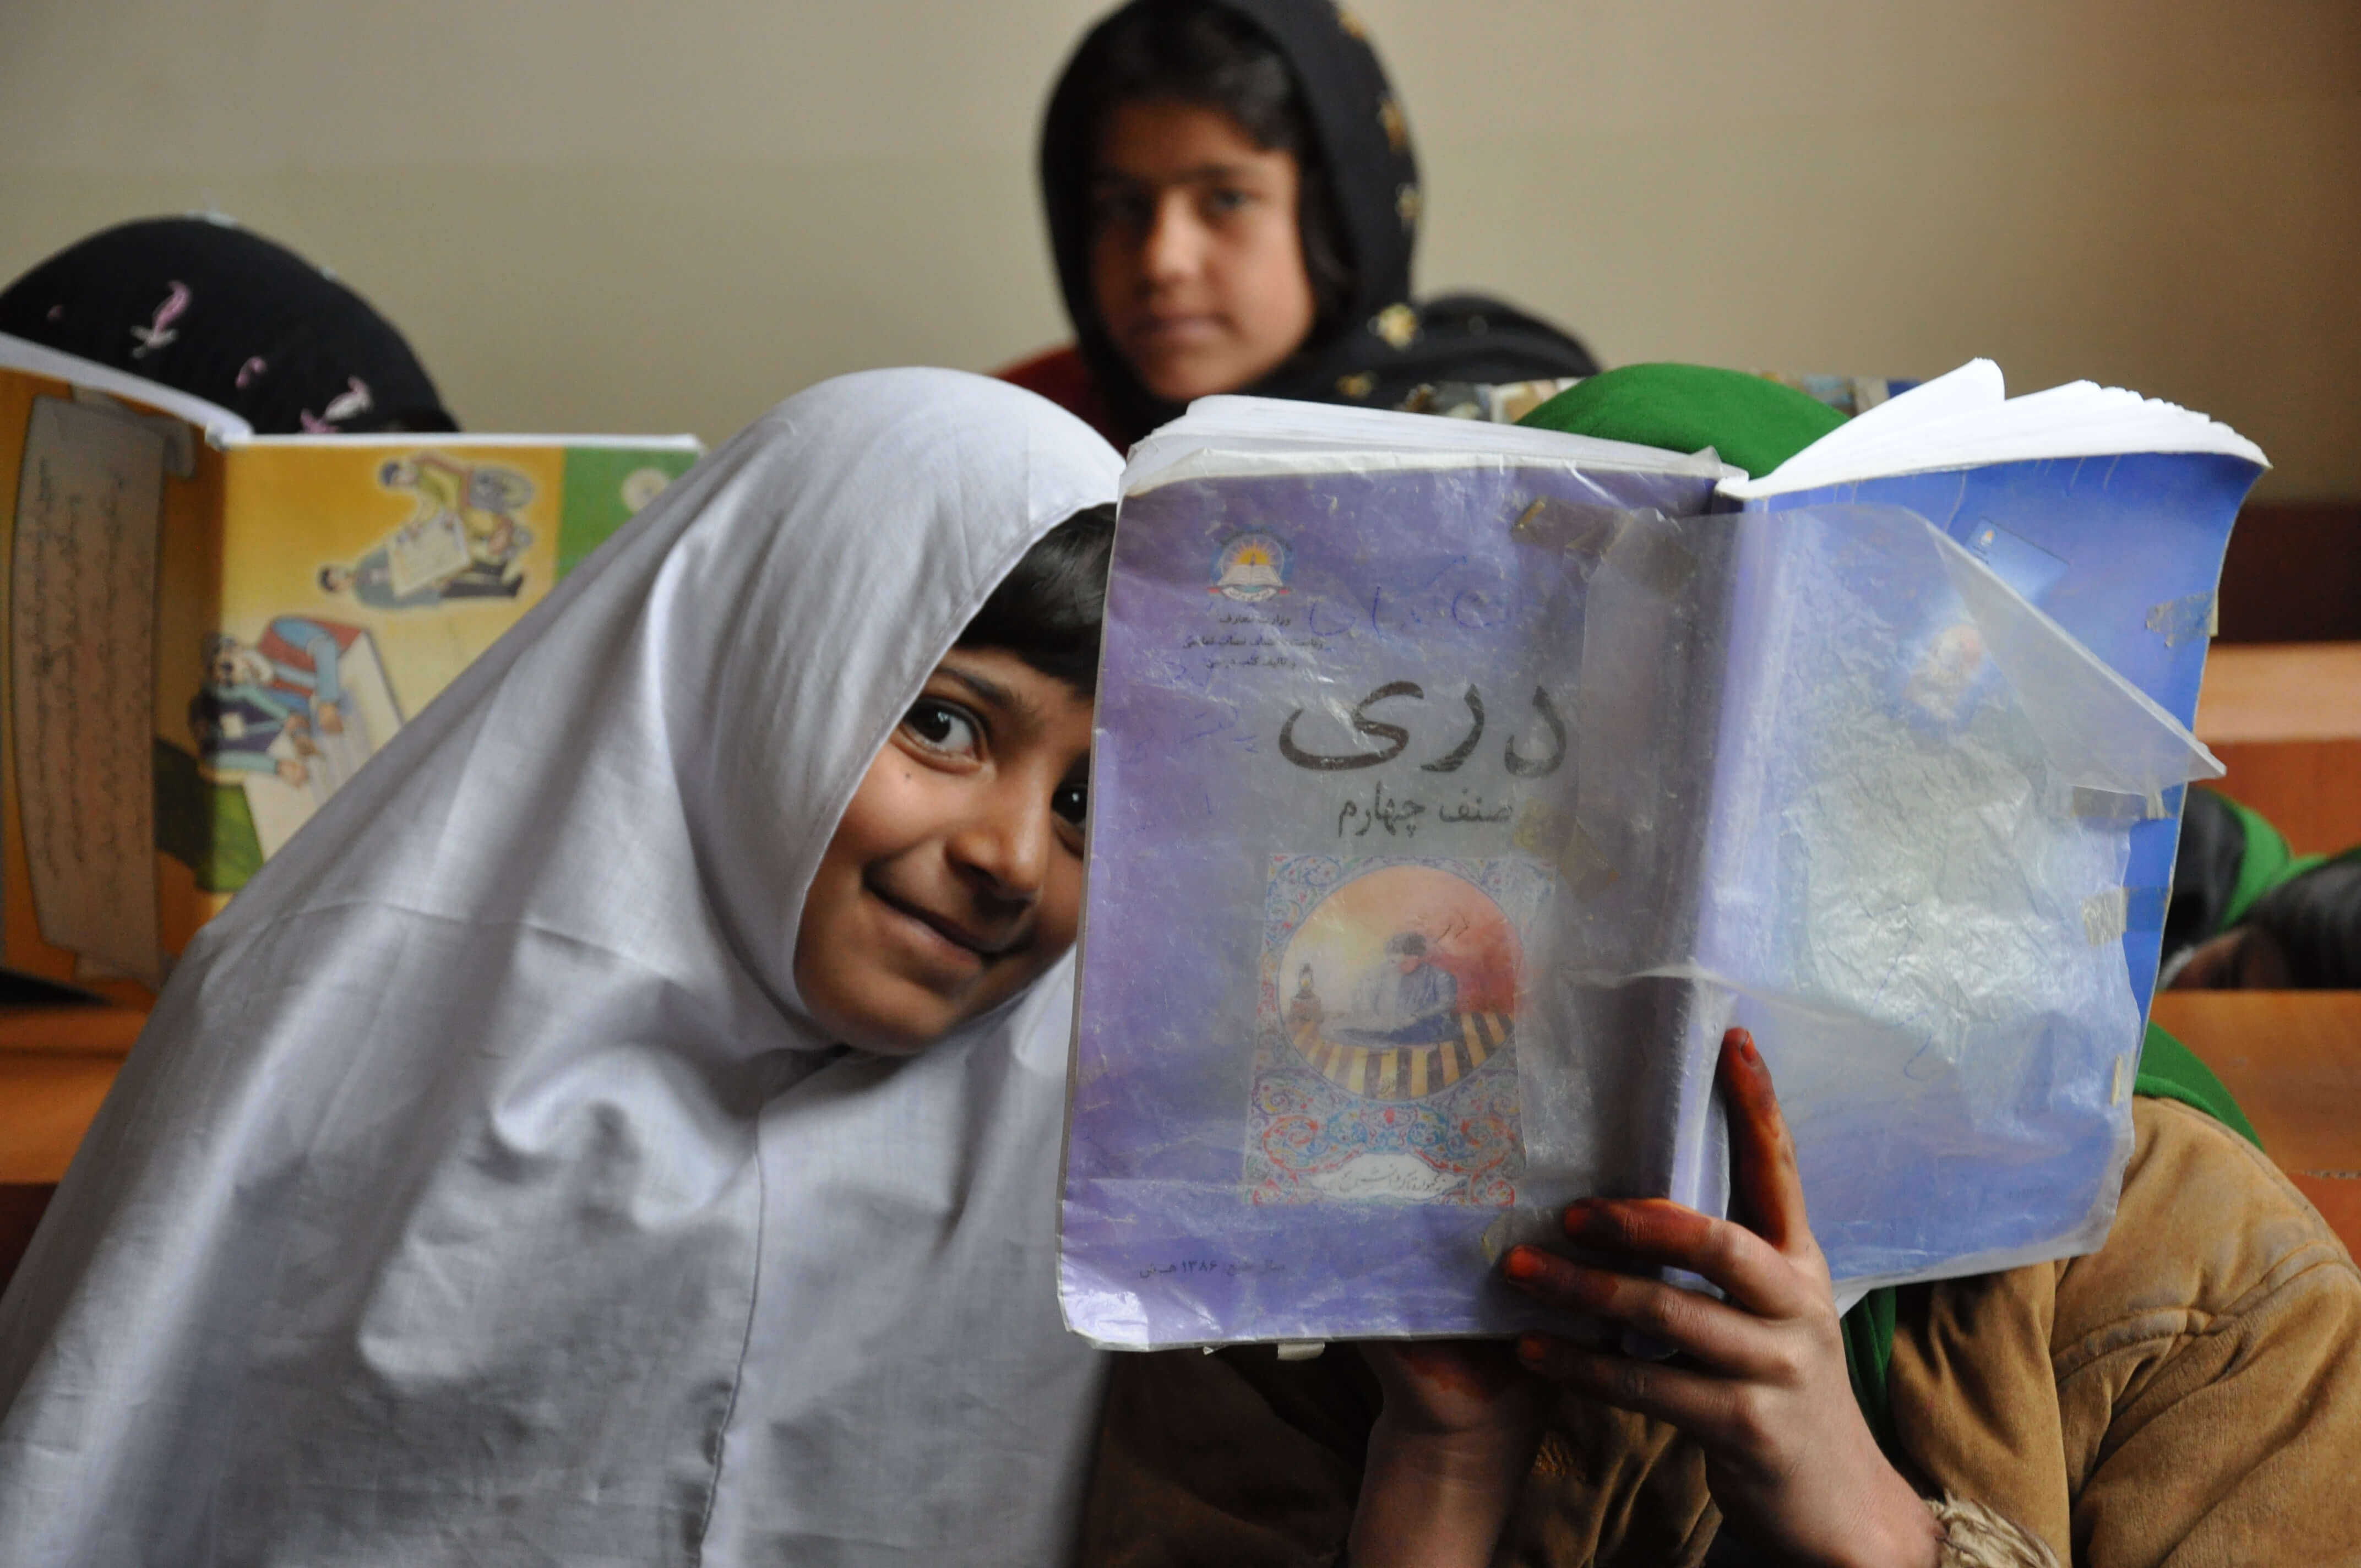 A young girl wearing a head covering looks playfully at the camera. Beside her is someone holding up a book to their face. Another girl who is out of focus looks at the camera in the background. Color photograph.